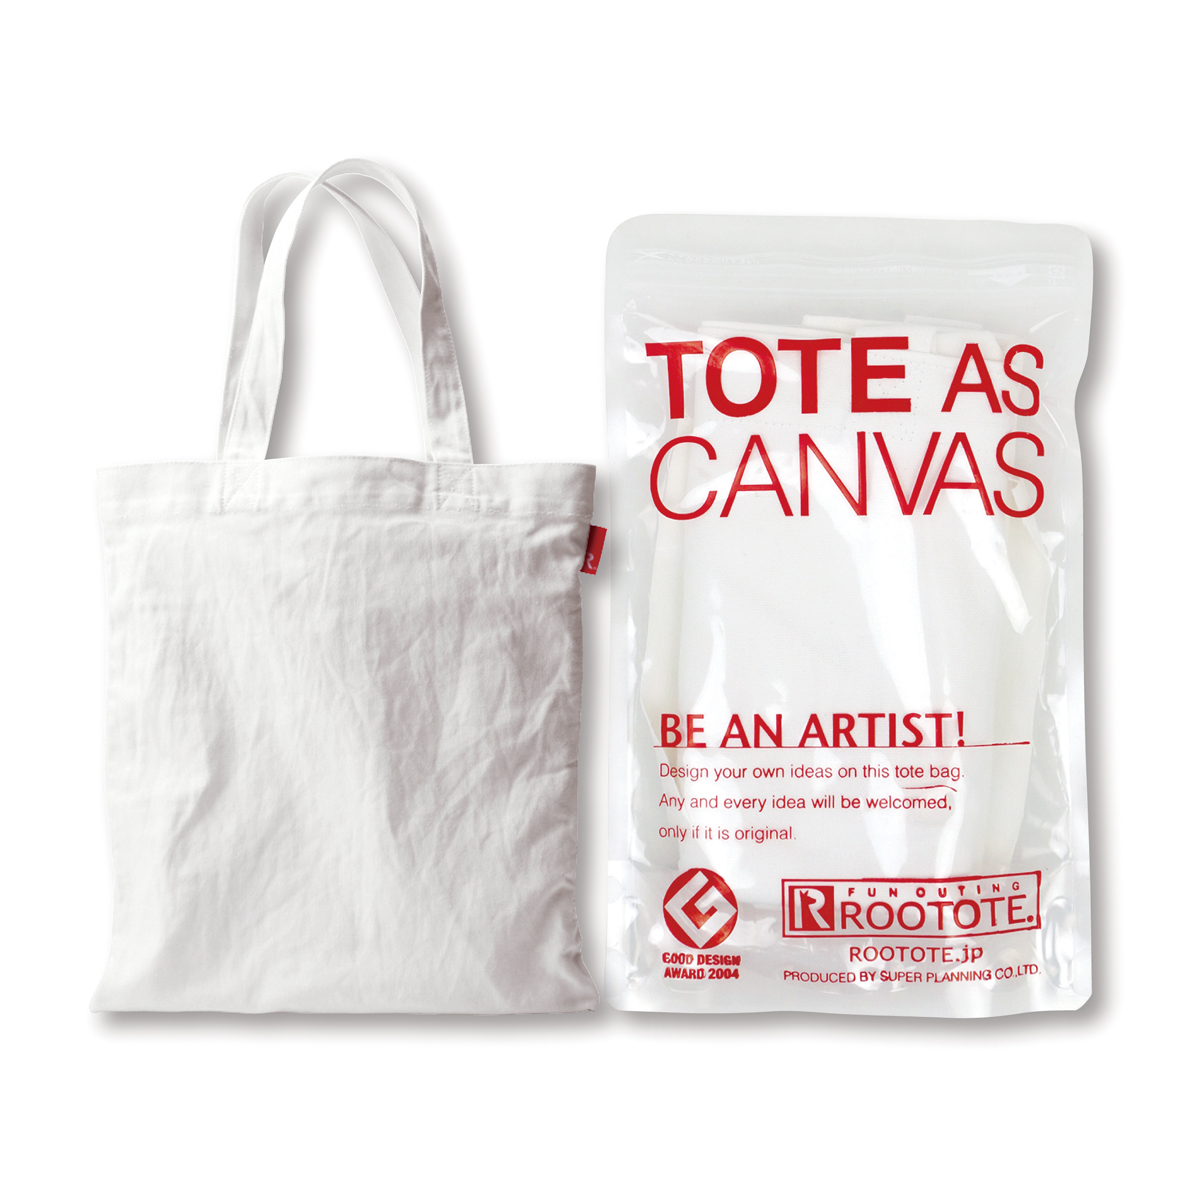 tote as canvas image1